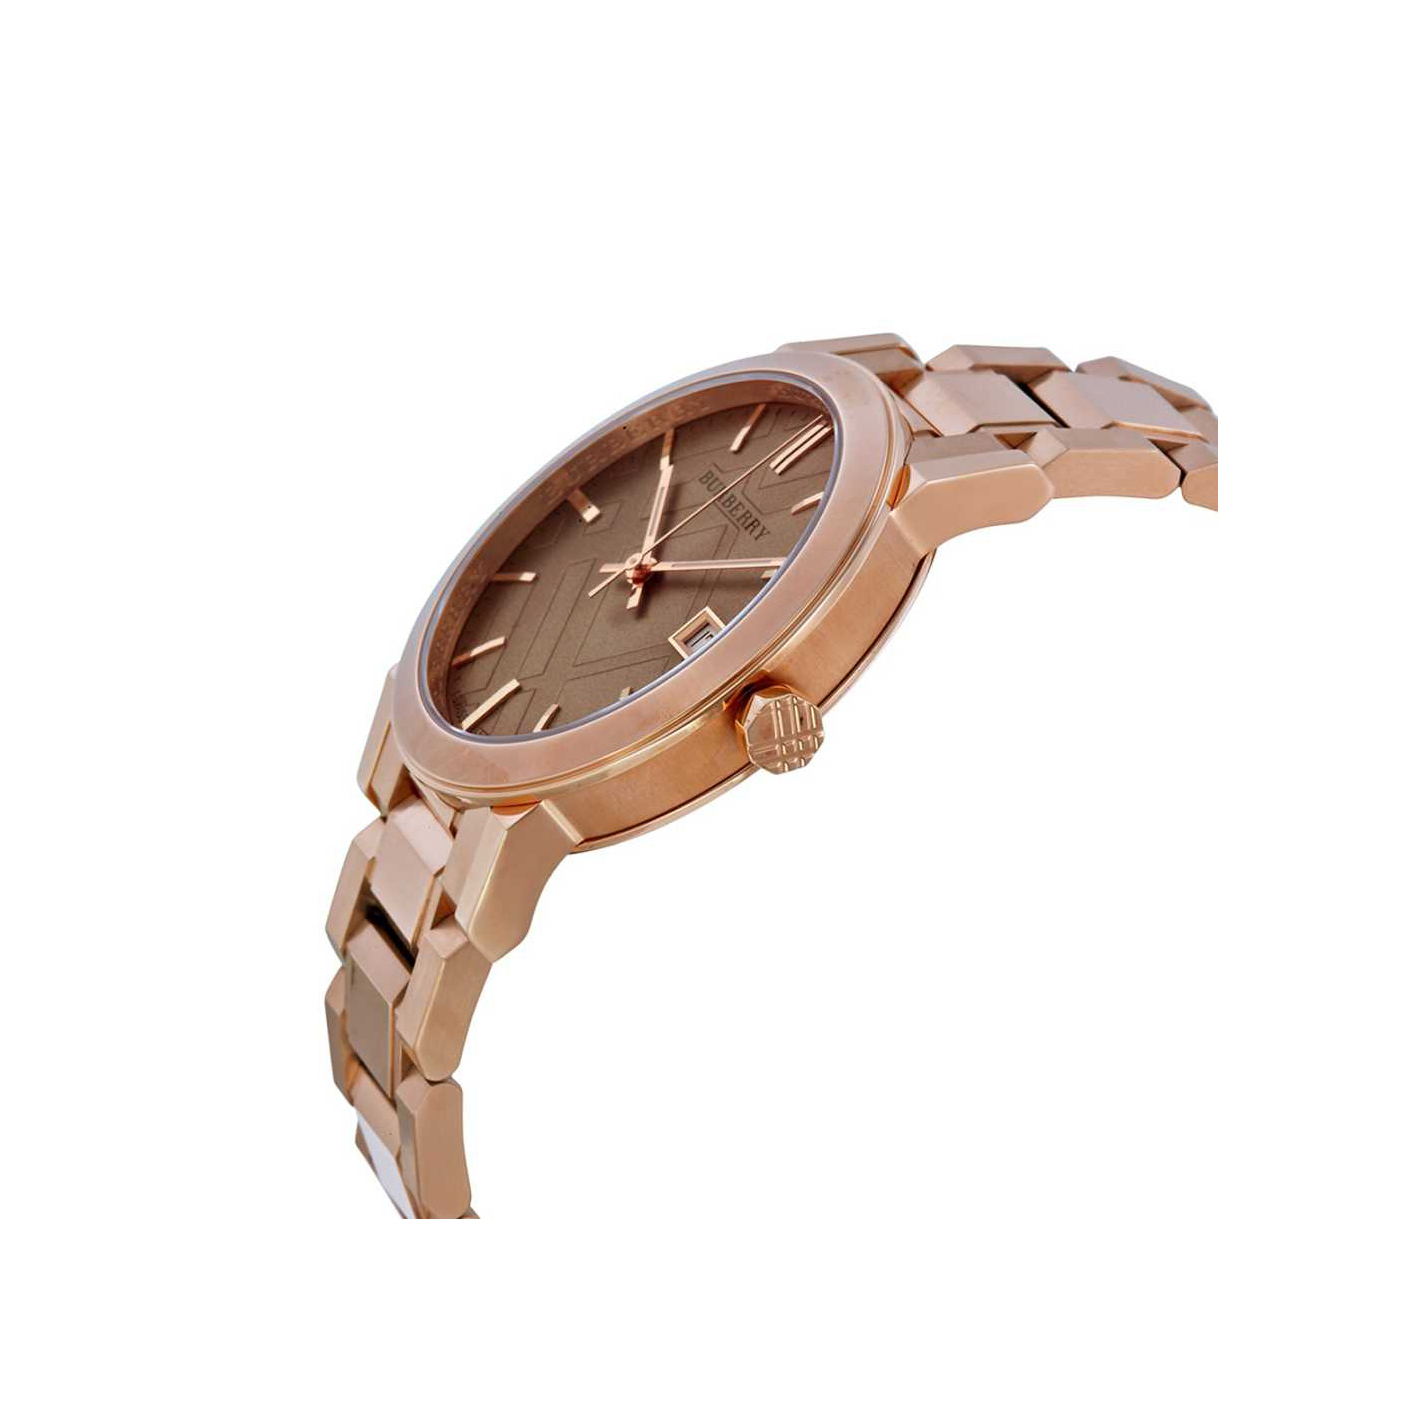 THE CITY ROSE GOLD ION-PLATED STAINLESS STEEL BRACELET WATCH 38MM